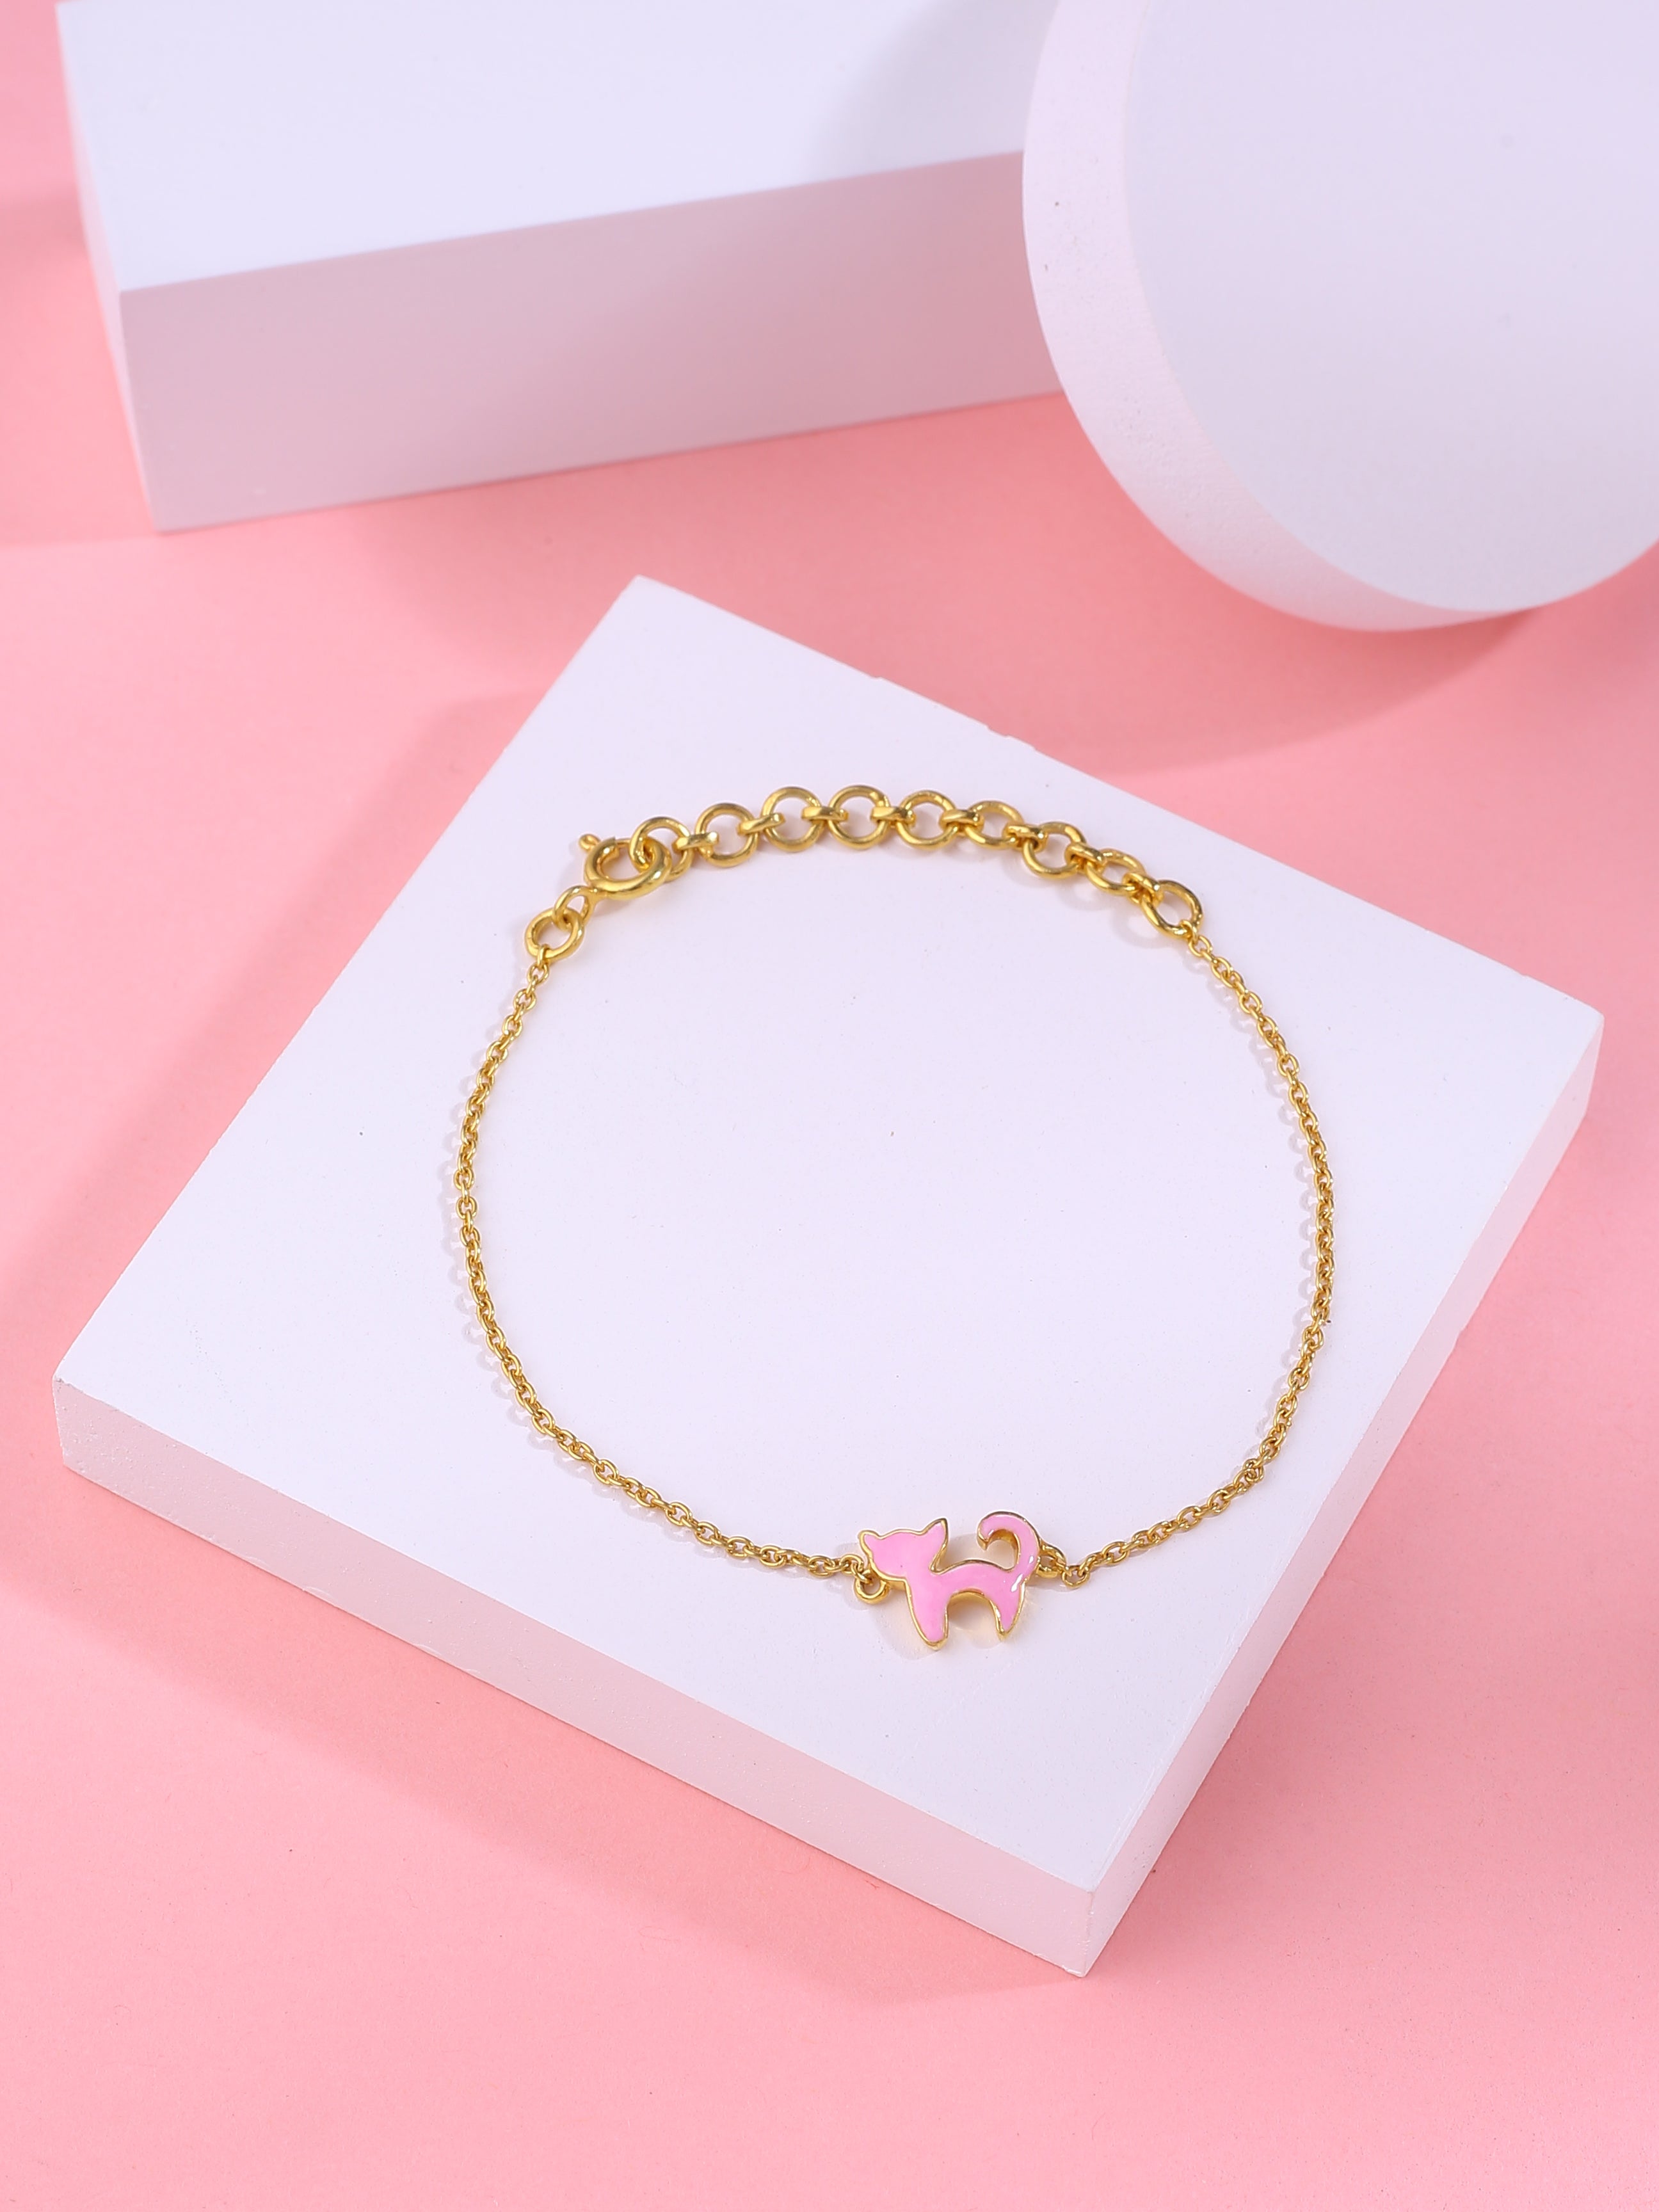 Purrfectly Adorable Kitty Bracelet